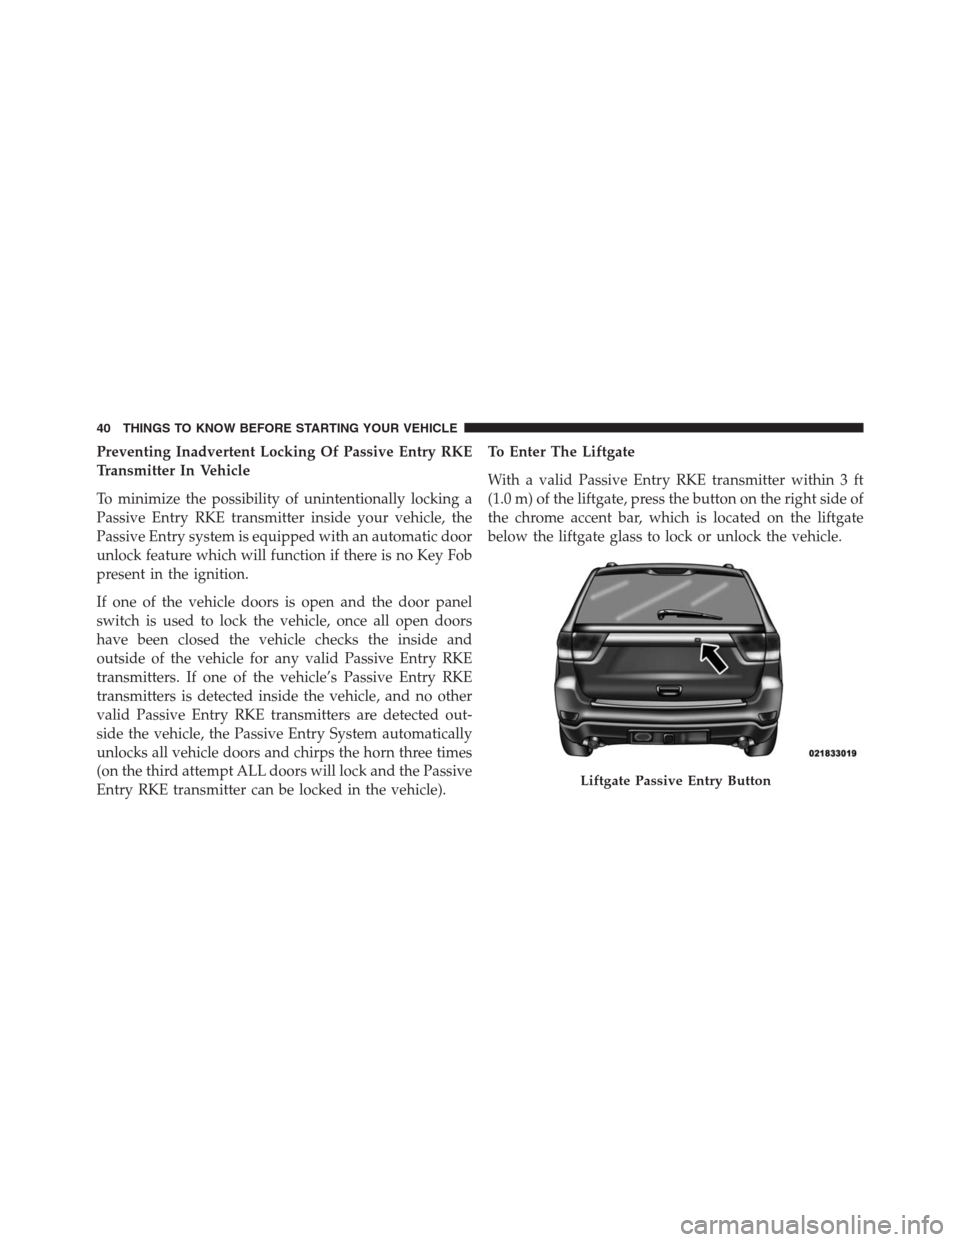 JEEP GRAND CHEROKEE 2013 WK2 / 4.G Owners Manual Preventing Inadvertent Locking Of Passive Entry RKE
Transmitter In Vehicle
To minimize the possibility of unintentionally locking a
Passive Entry RKE transmitter inside your vehicle, the
Passive Entry